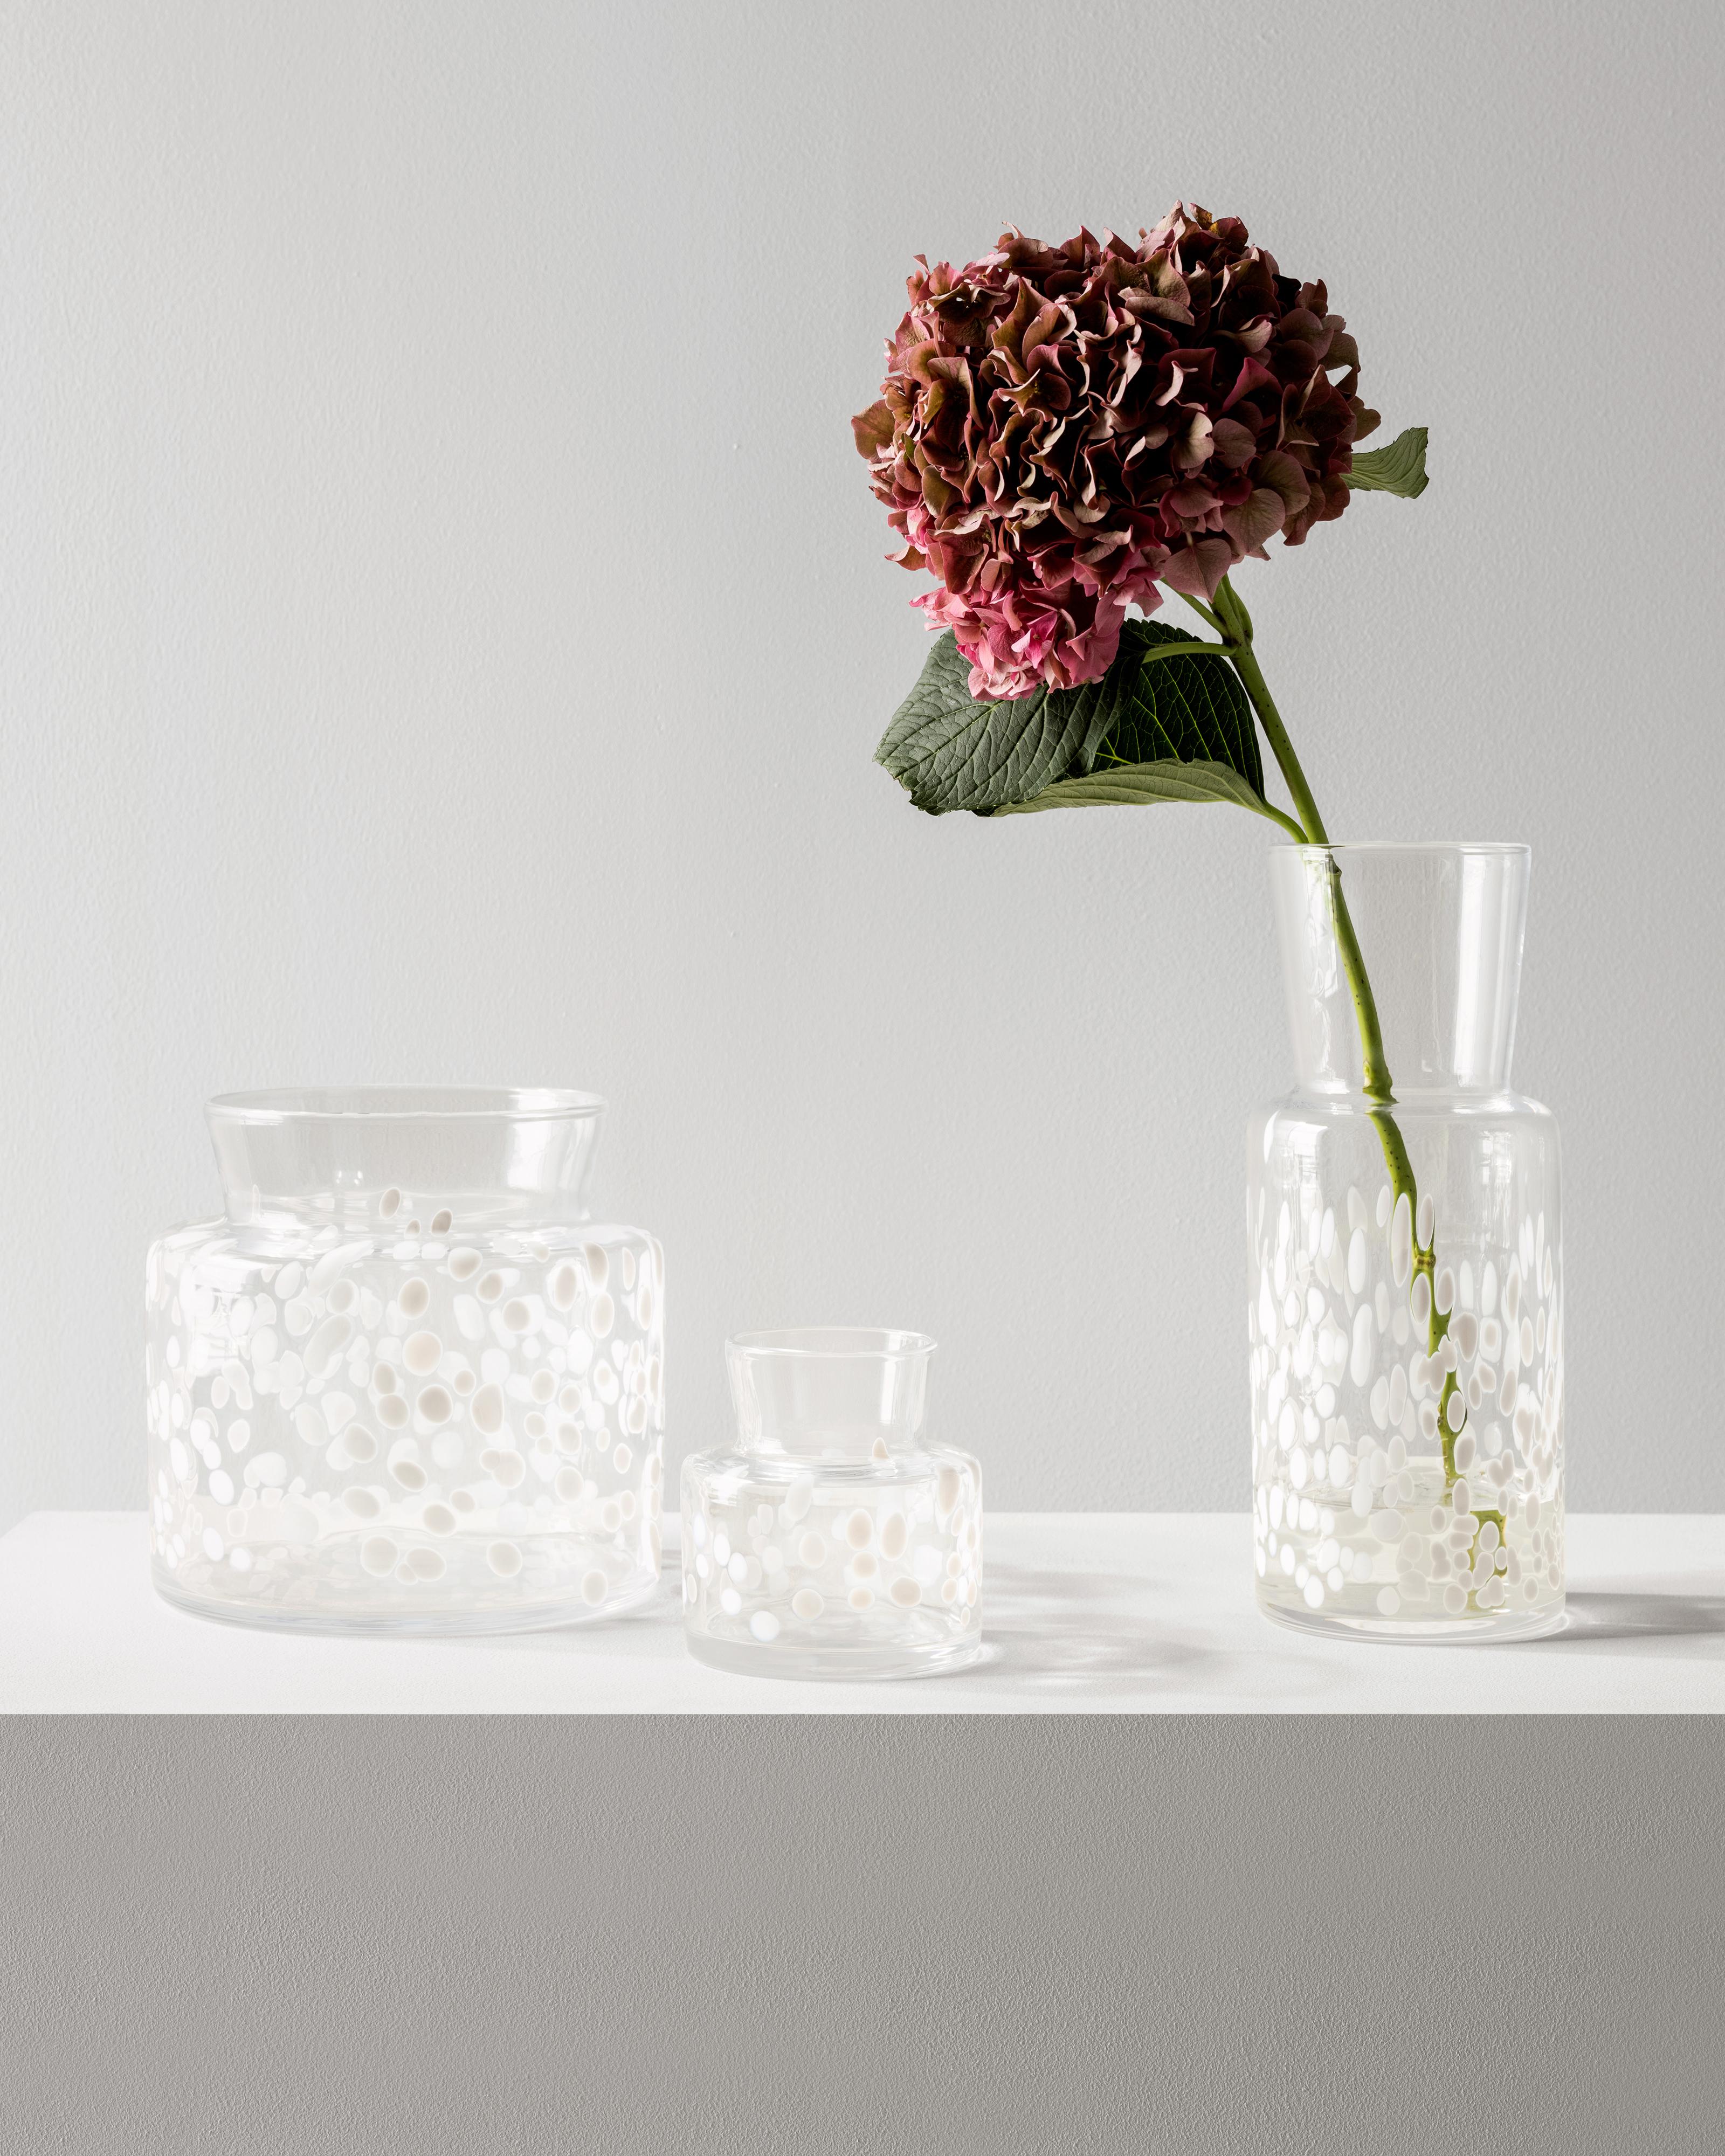 Meadow Winter is like a warm embrace, perfect for creating flower arrangements like a small meadow frozen in time. During the production the vases are rolled in crushed pieces of white glass, which makes each vase unique. The small vase from Kosta